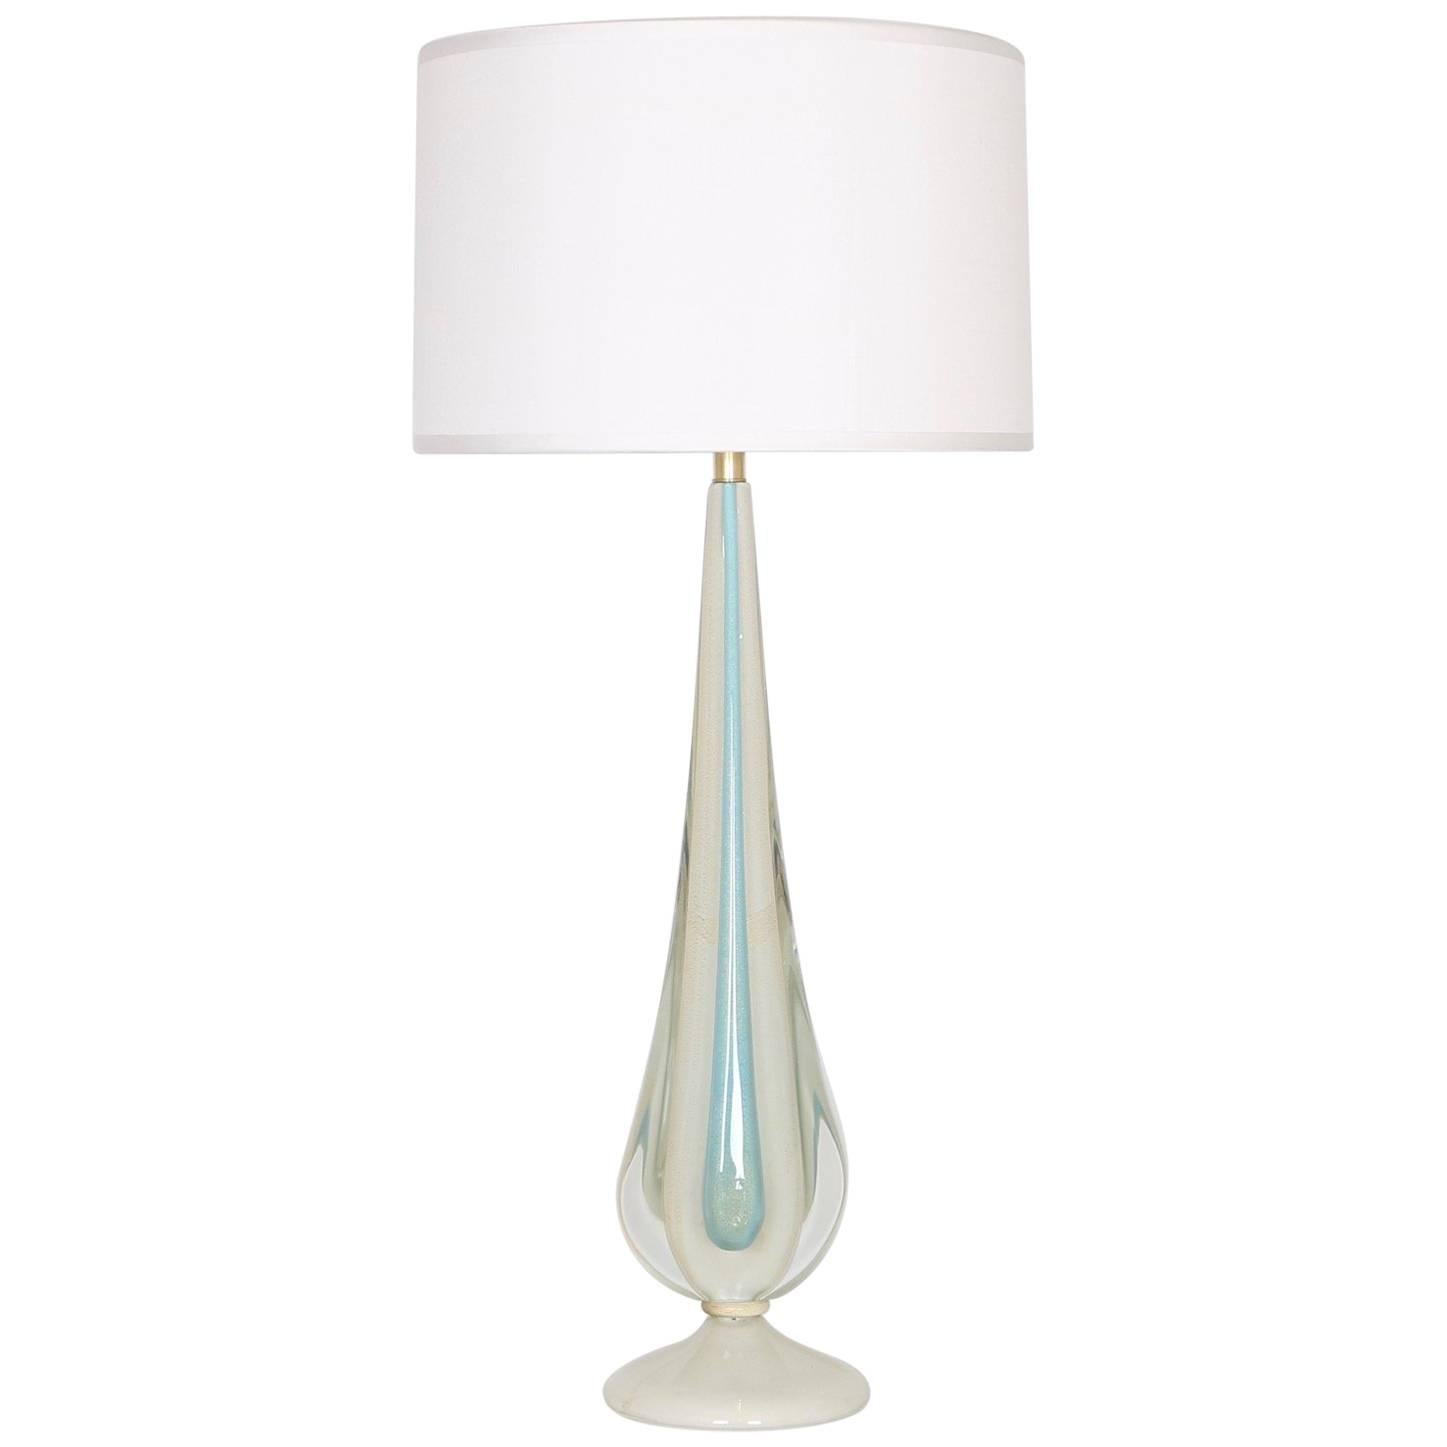 Flavio Poli for Seguso Sommerso Lamp in Blue and White with Gold Aventurine